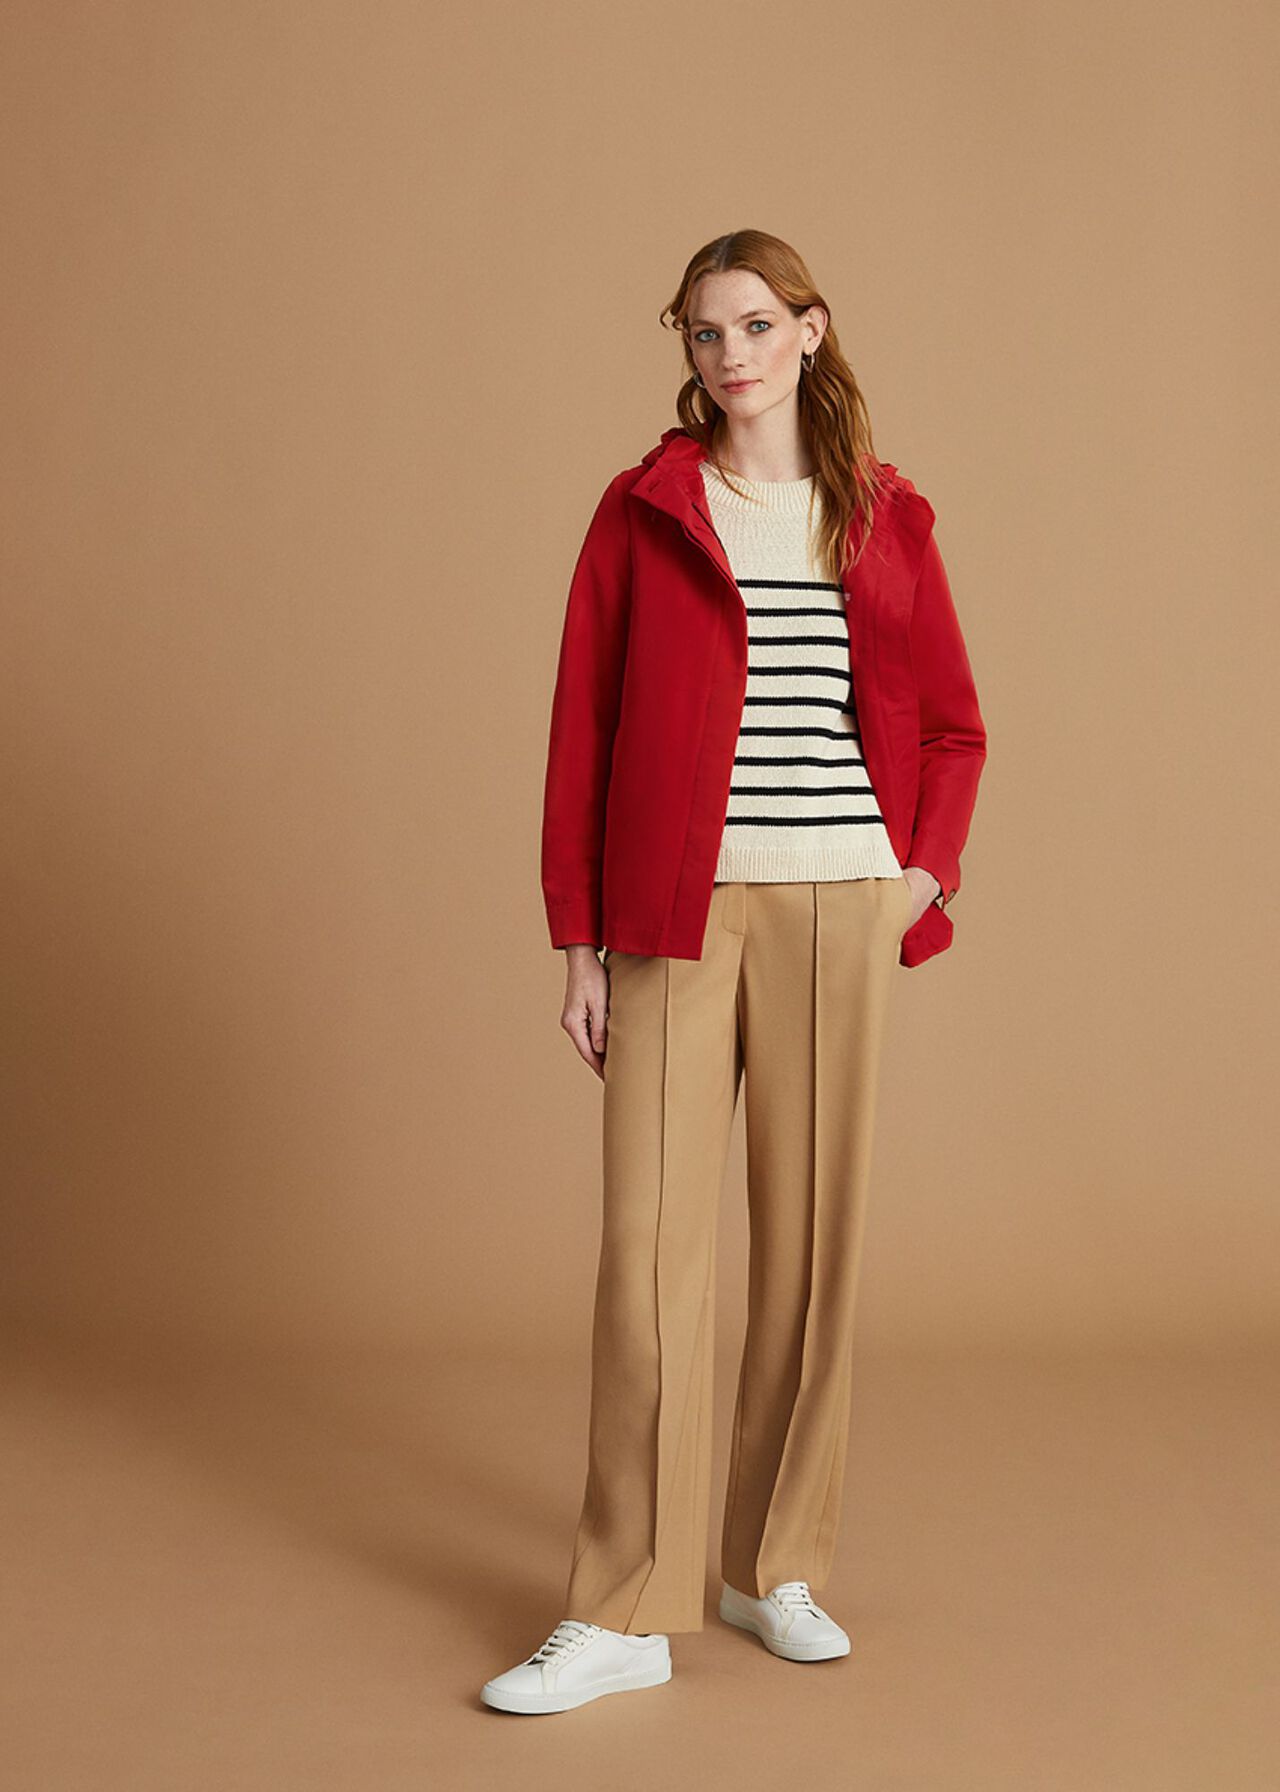 The Red Ceira Coat Outfit, , hi-res